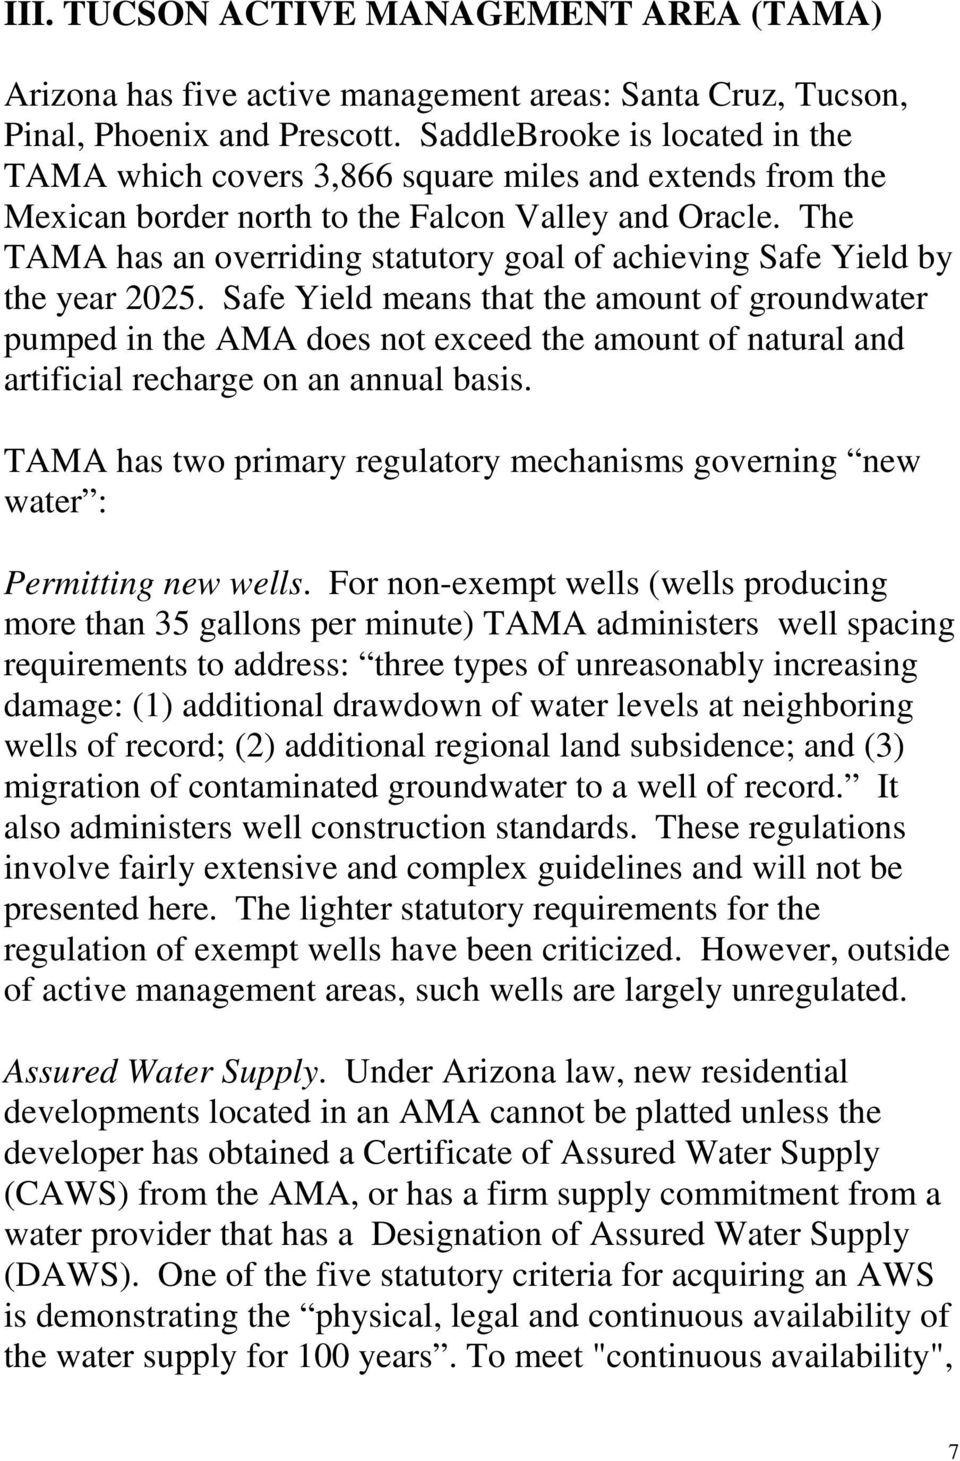 The TAMA has an overriding statutory goal of achieving Safe Yield by the year 2025.